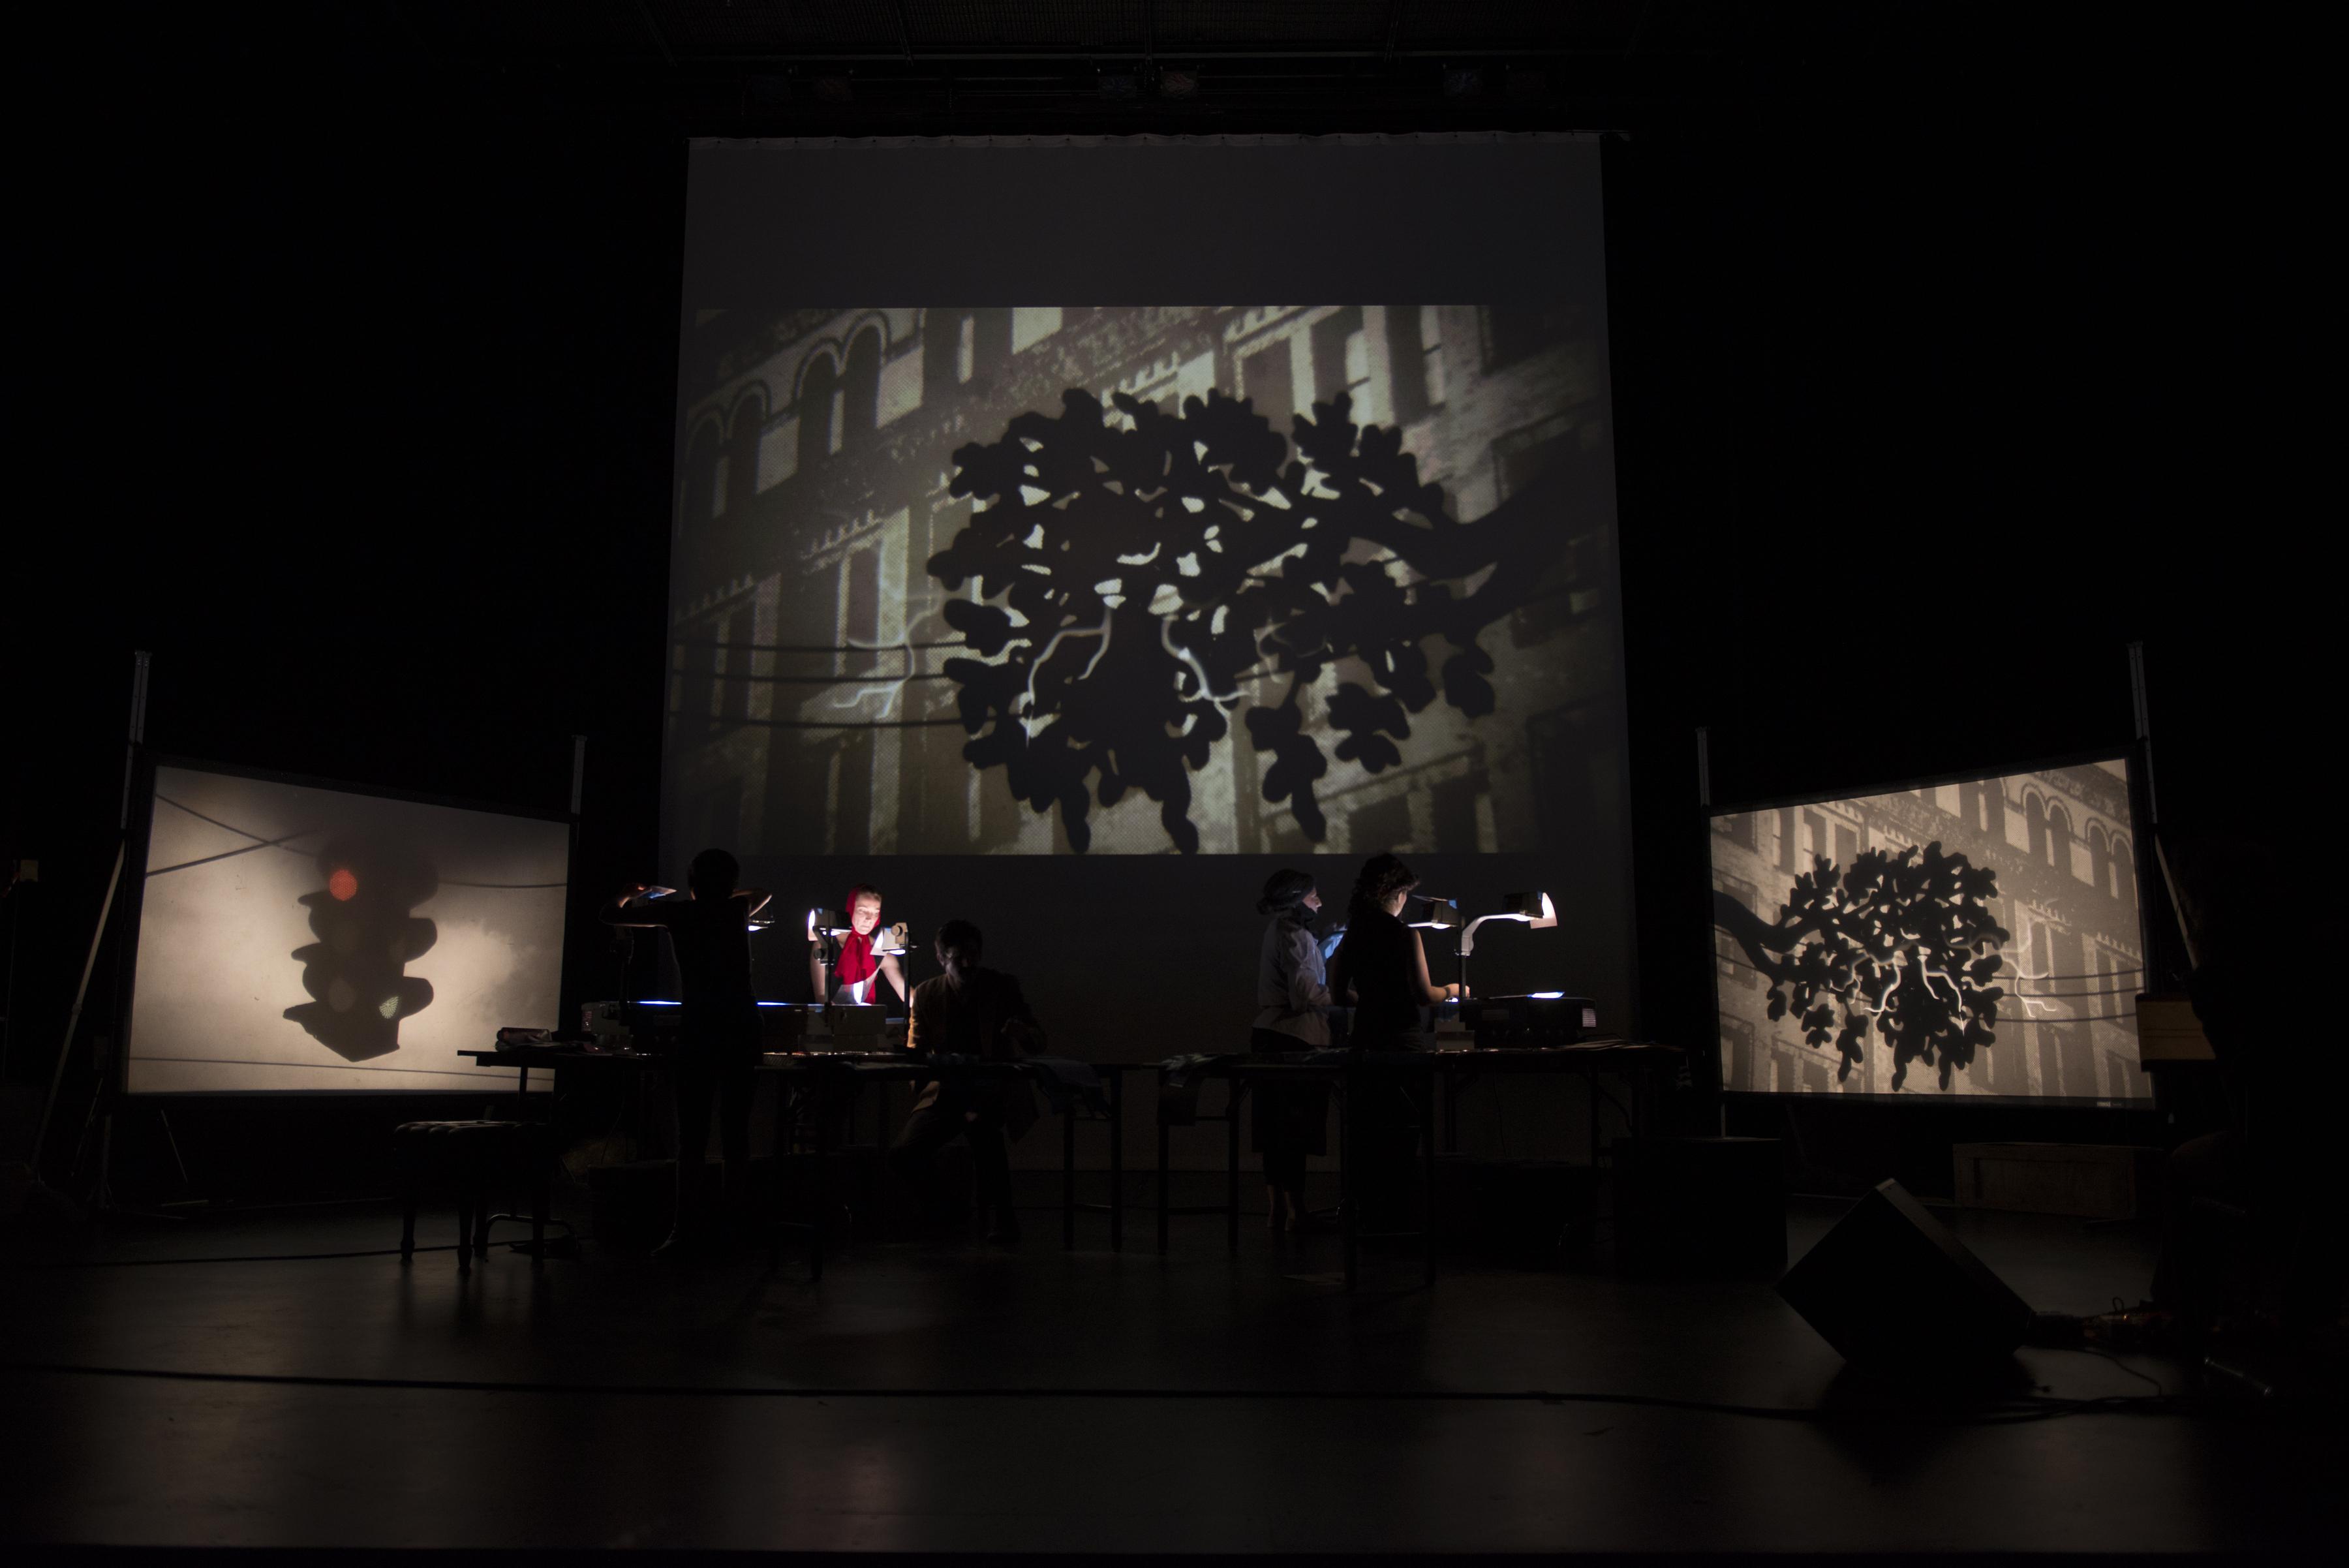 Technicians use overhead projectors to cast a street scene onto three large screens in the background.